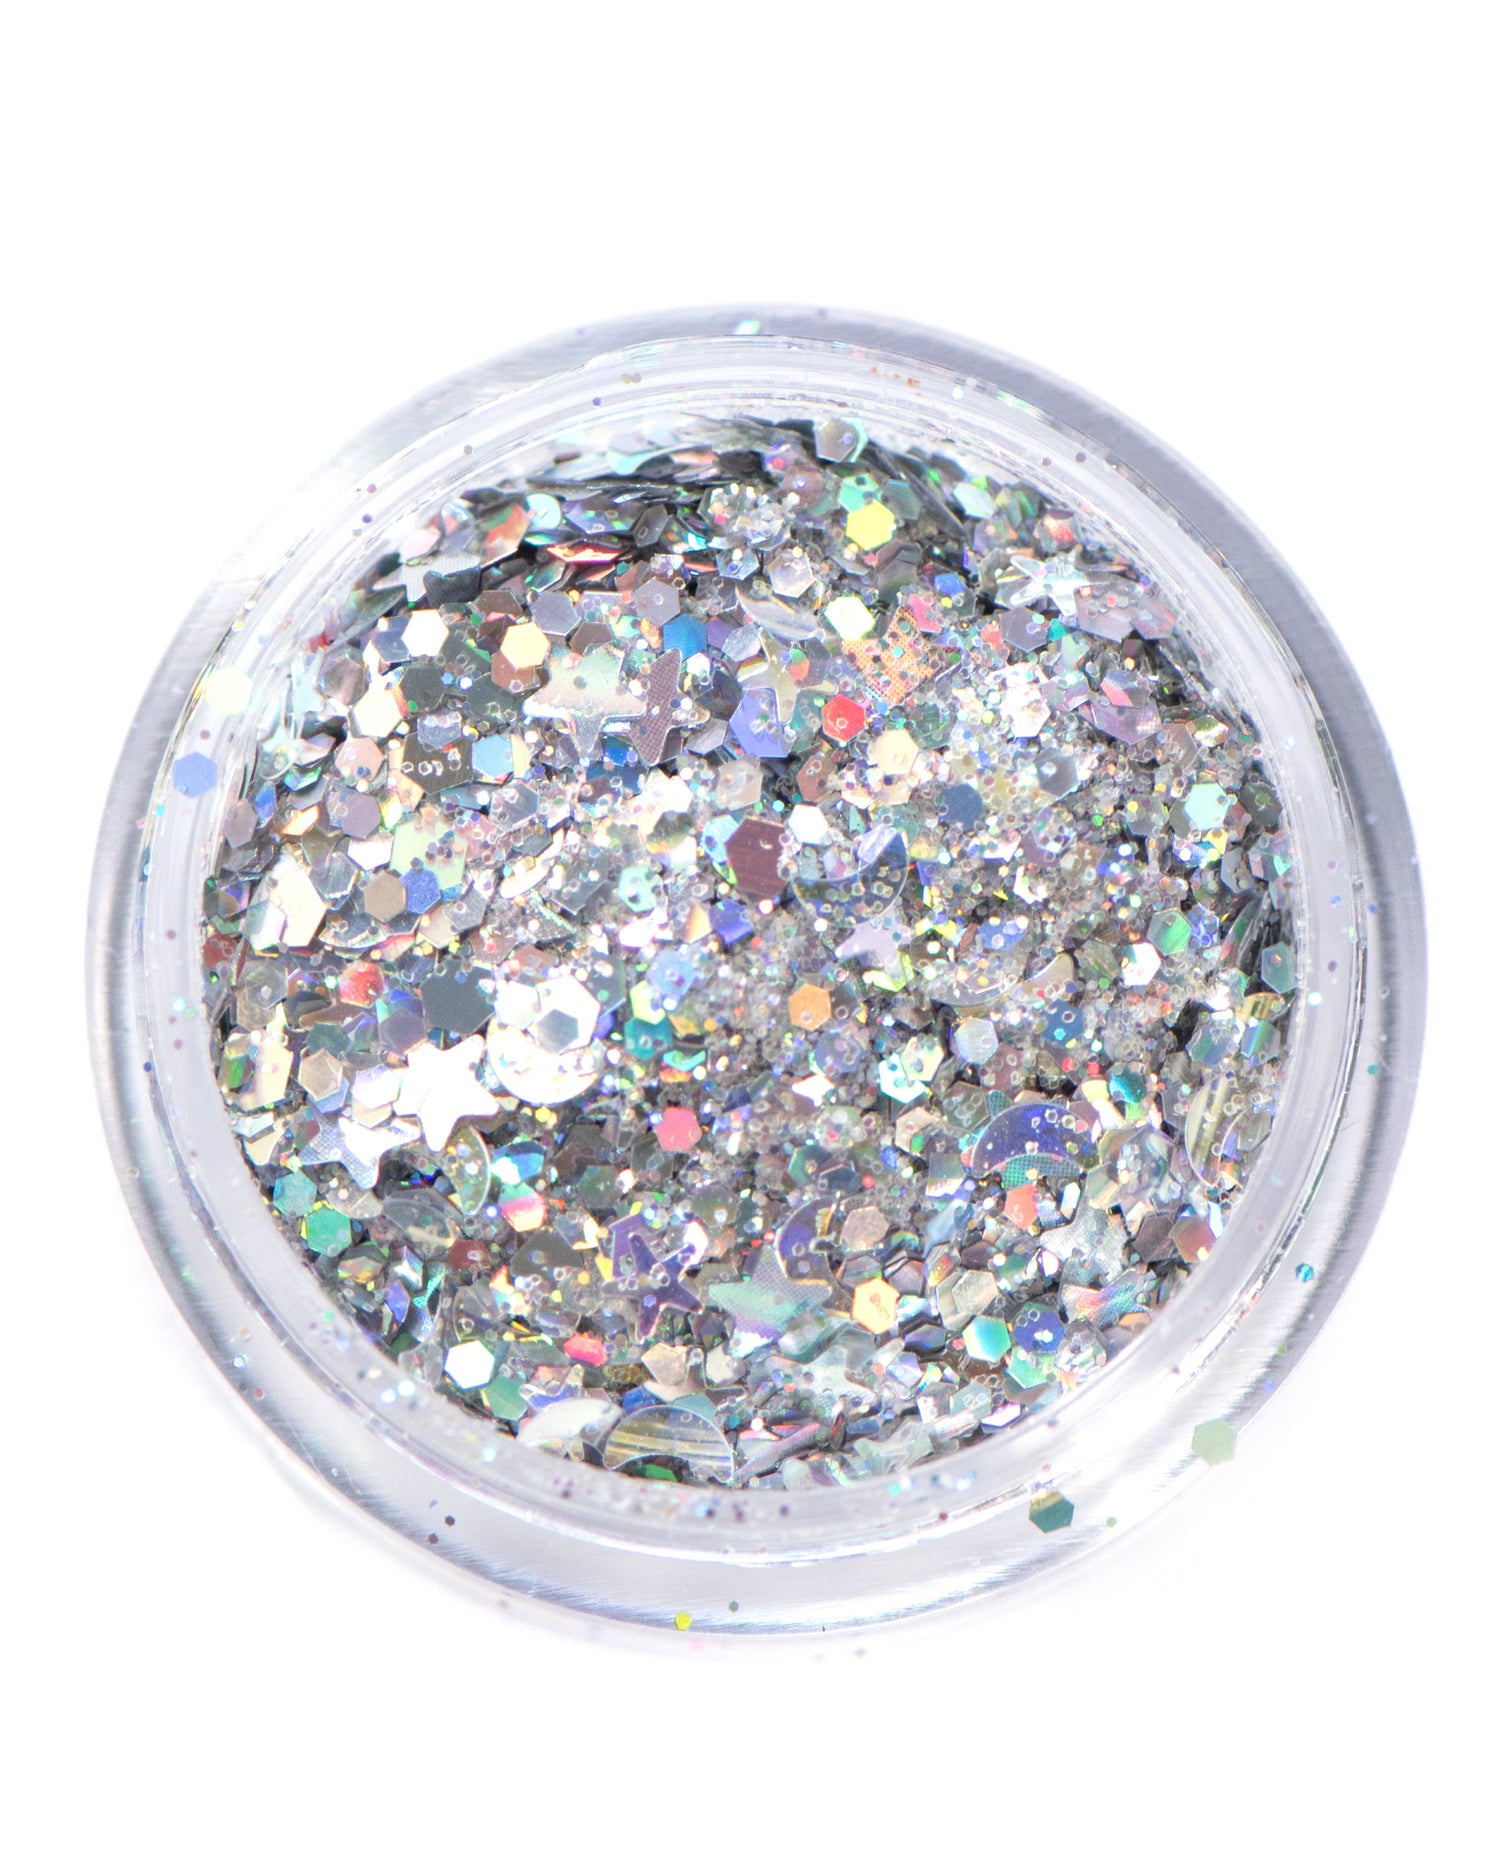 Holo Universe - Silver Holographic Chunky Glitter Mix with Moons and Stars - Lunautics Chunky Glitter